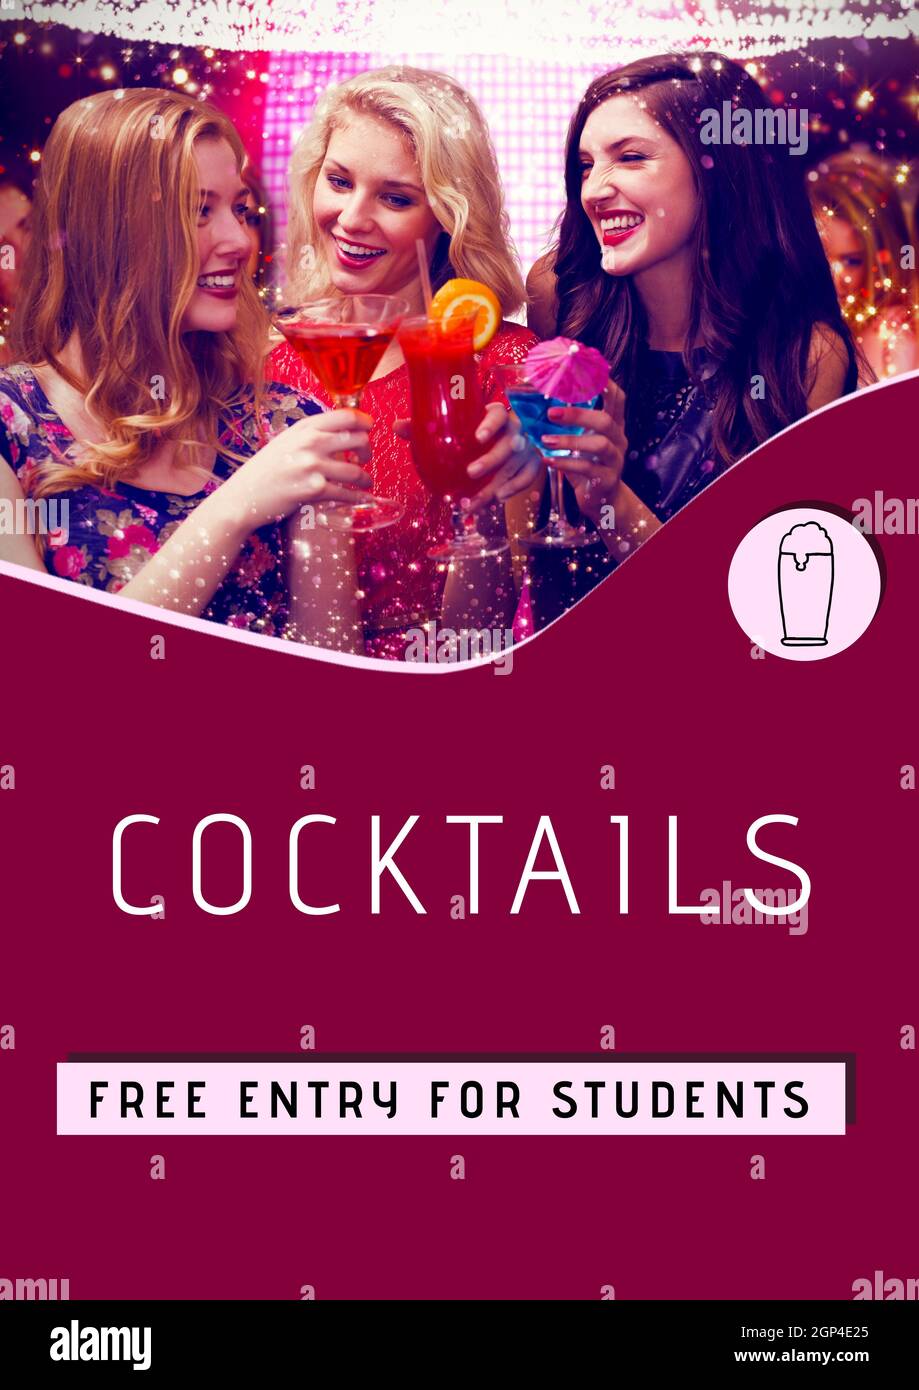 Composition of cocktails free entry for students text and group of female friends holding cocktails Stock Photo